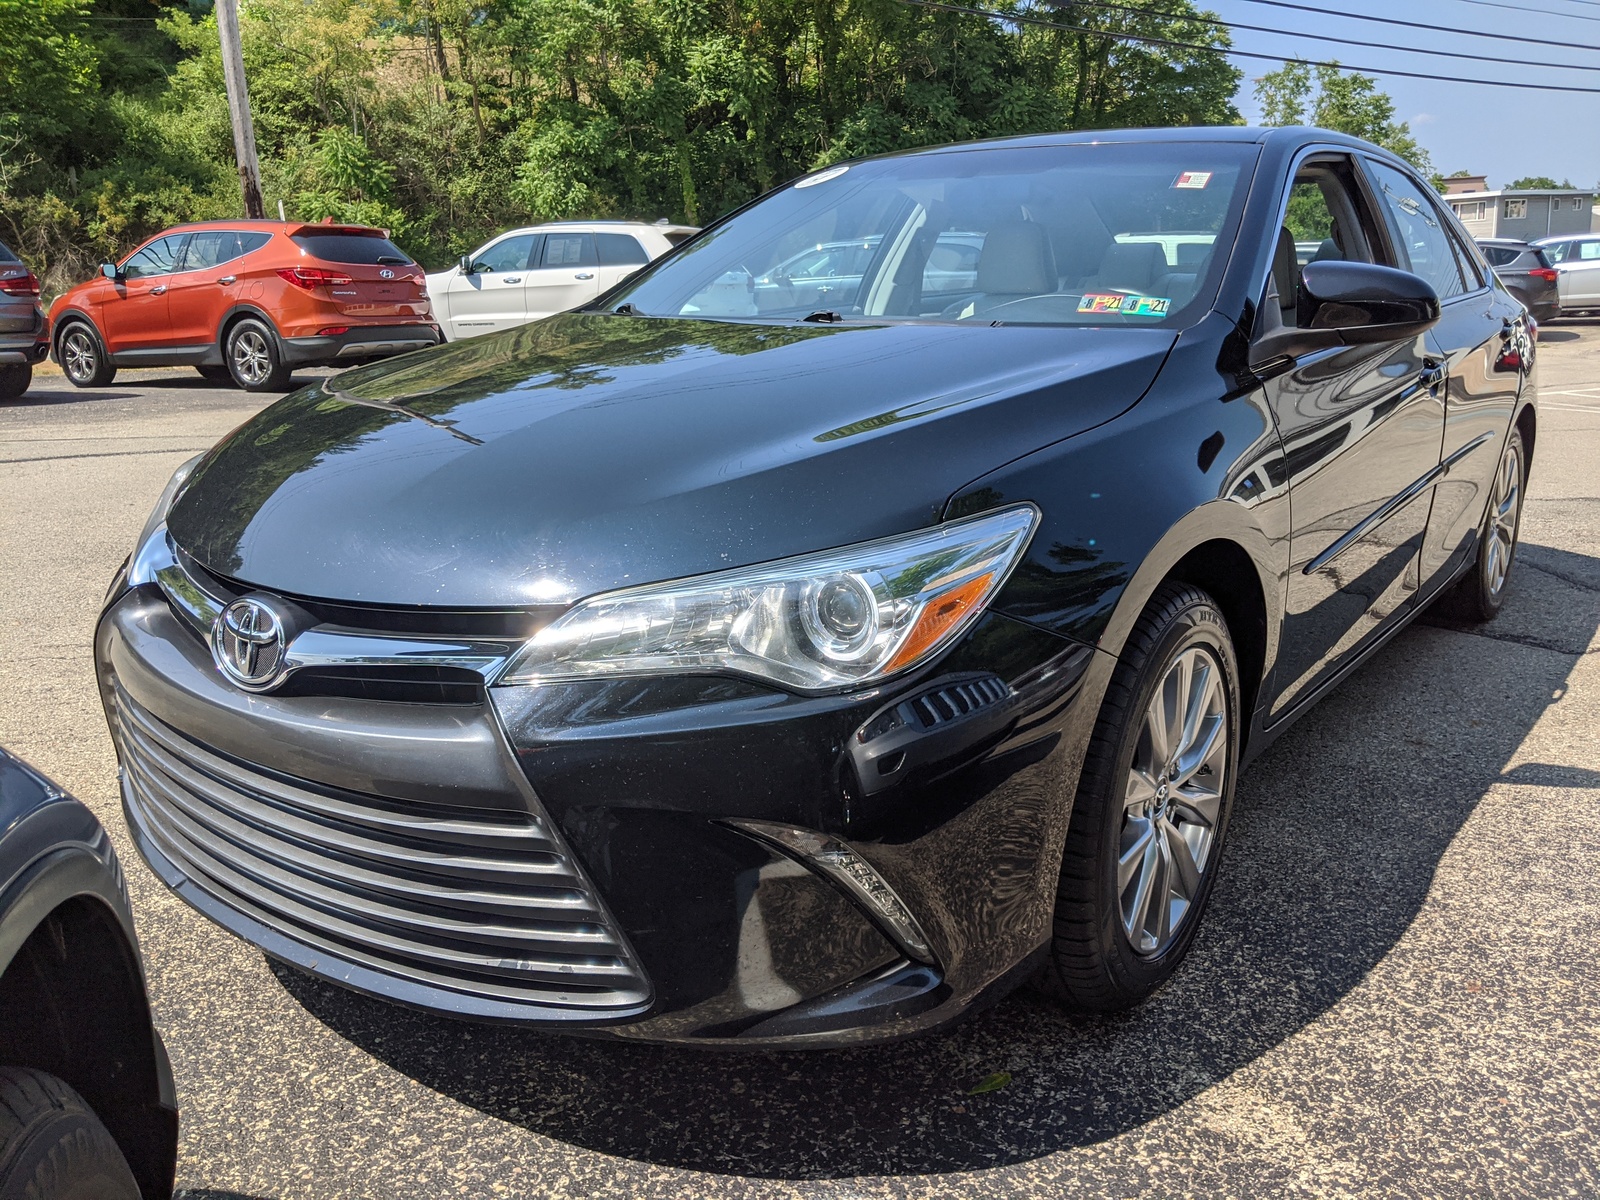 Pre-Owned 2015 Toyota Camry XLE in Attitude Black | Greensburg, PA | #